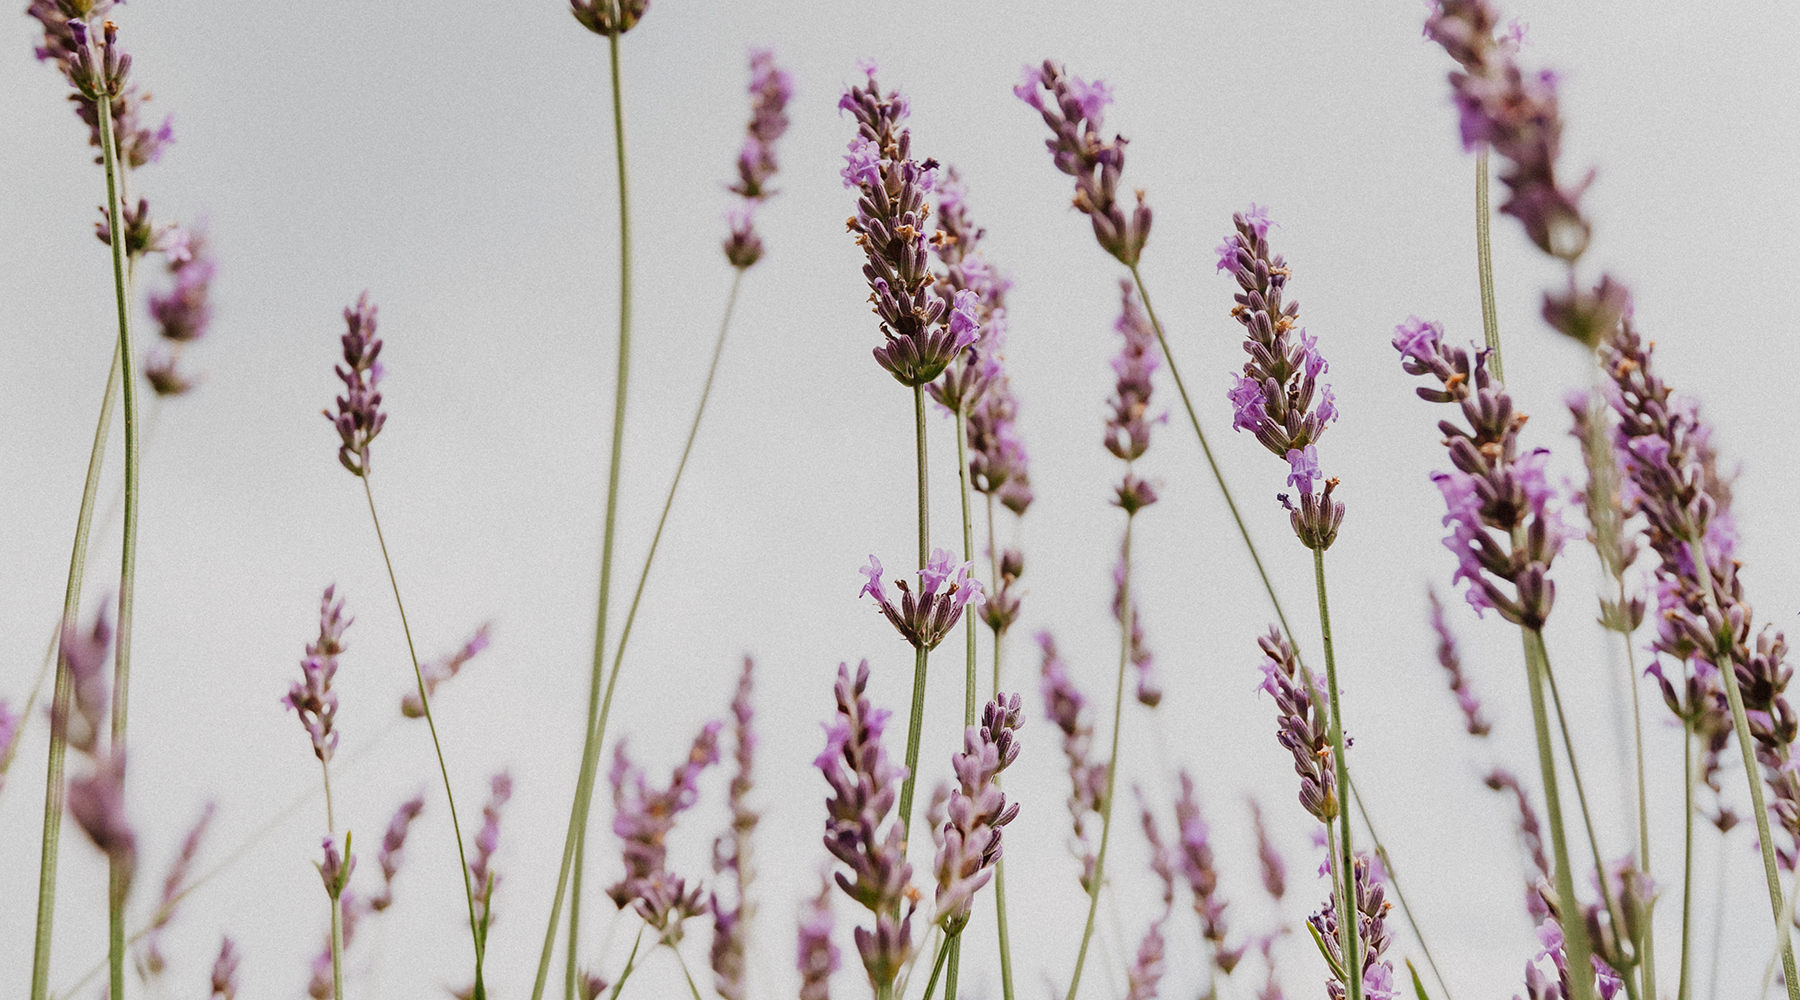 Lavender scent has a long history of promoting wellness.